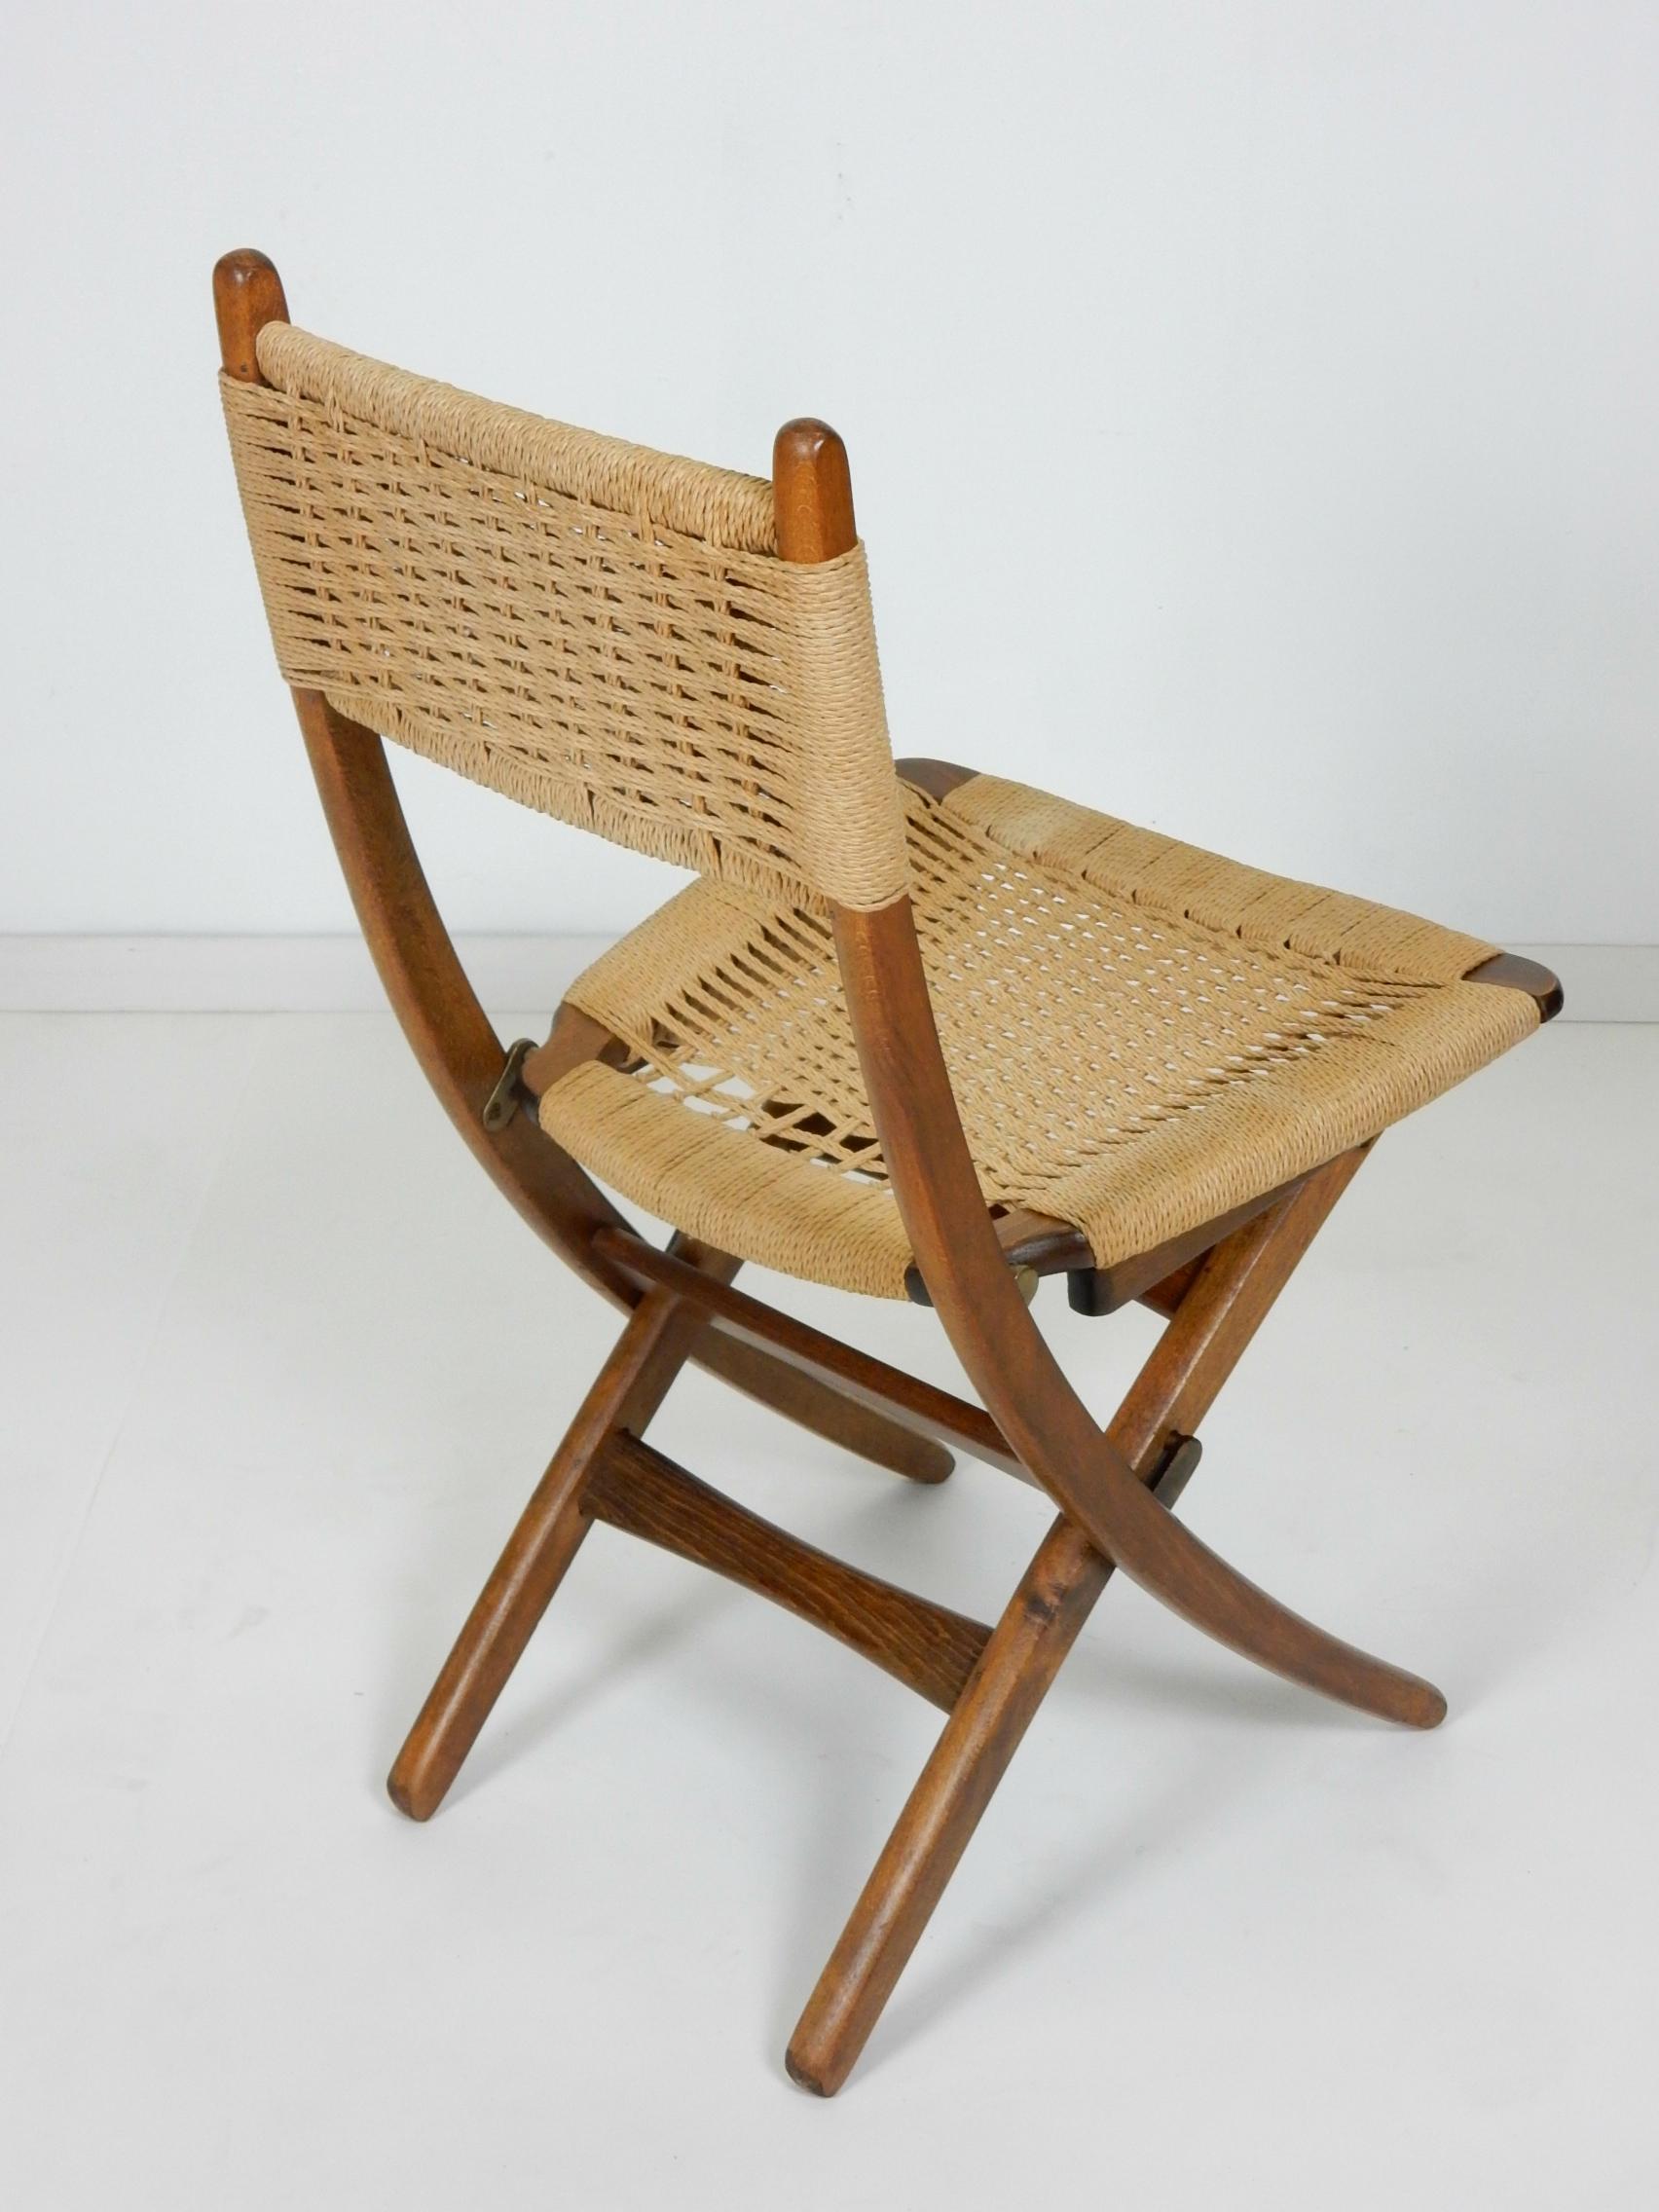 Set of 4 rope upholstered scissor chairs, circa 1950s
in the style of Danish designer Hans Wegner. 
Each folds for ease of storage.
Brass hardware with natural rope woven seat and back.
All are in very good condition with no damage or repairs.